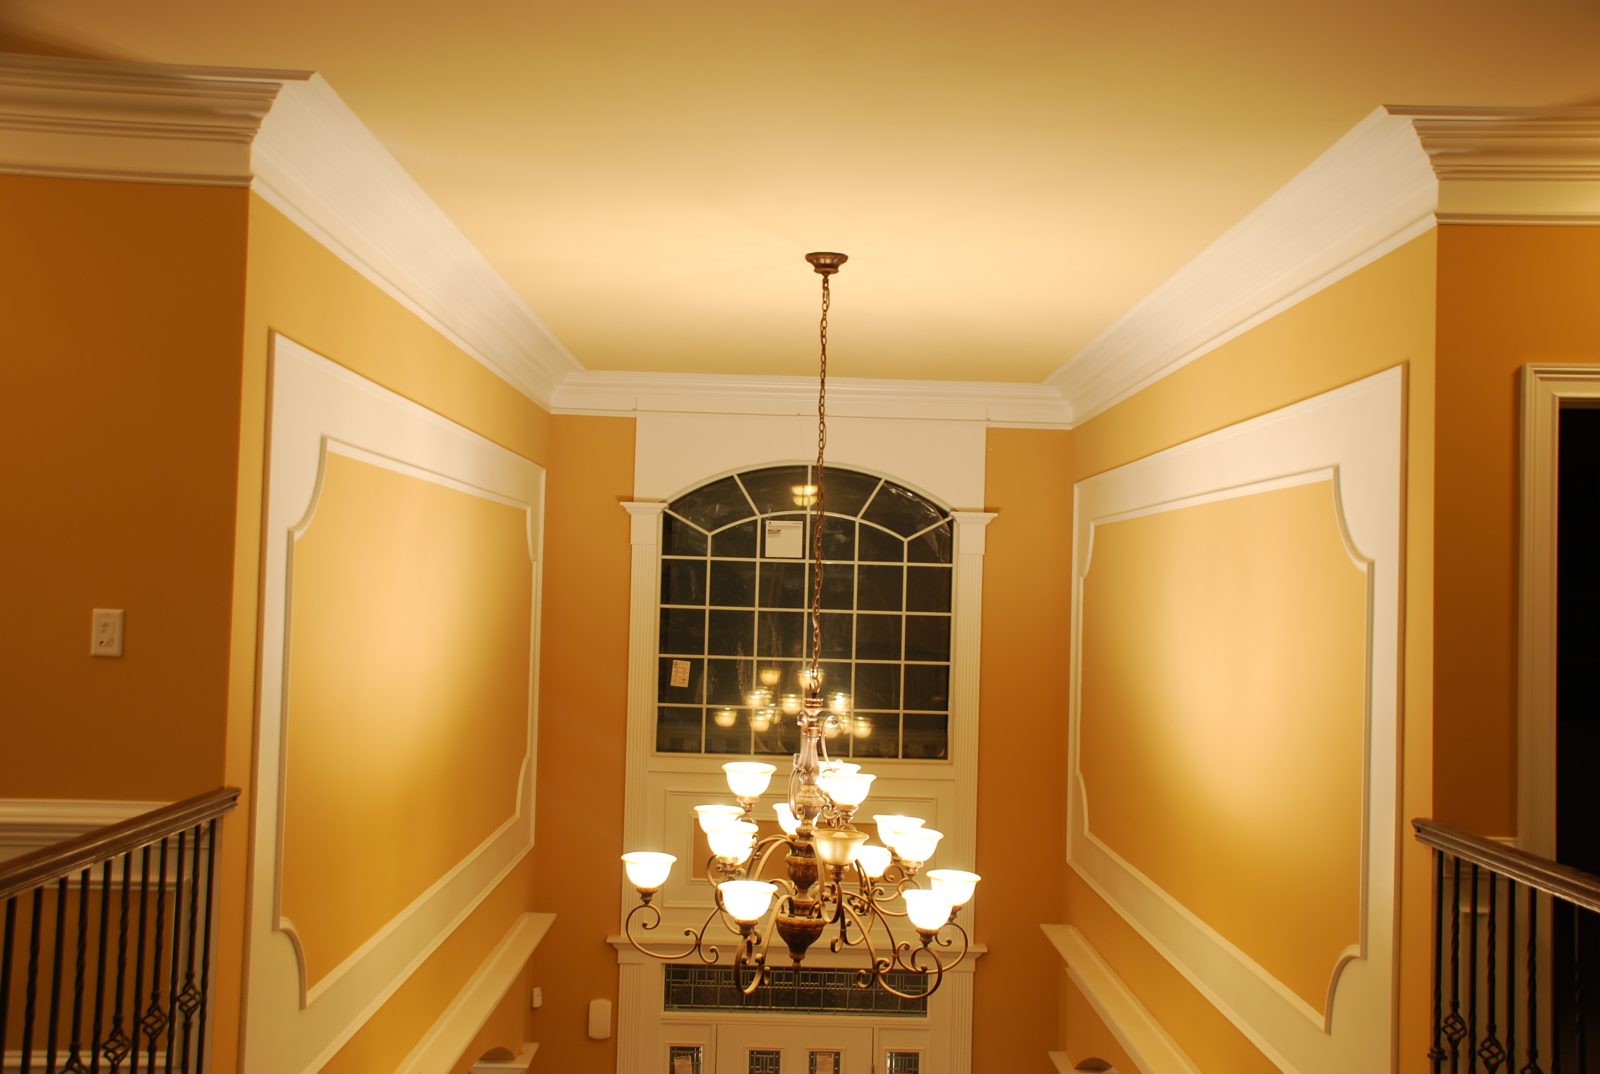 60 Interior Design Ideas With Top Moldings From Real Apartments As Excellent Options Of Decor